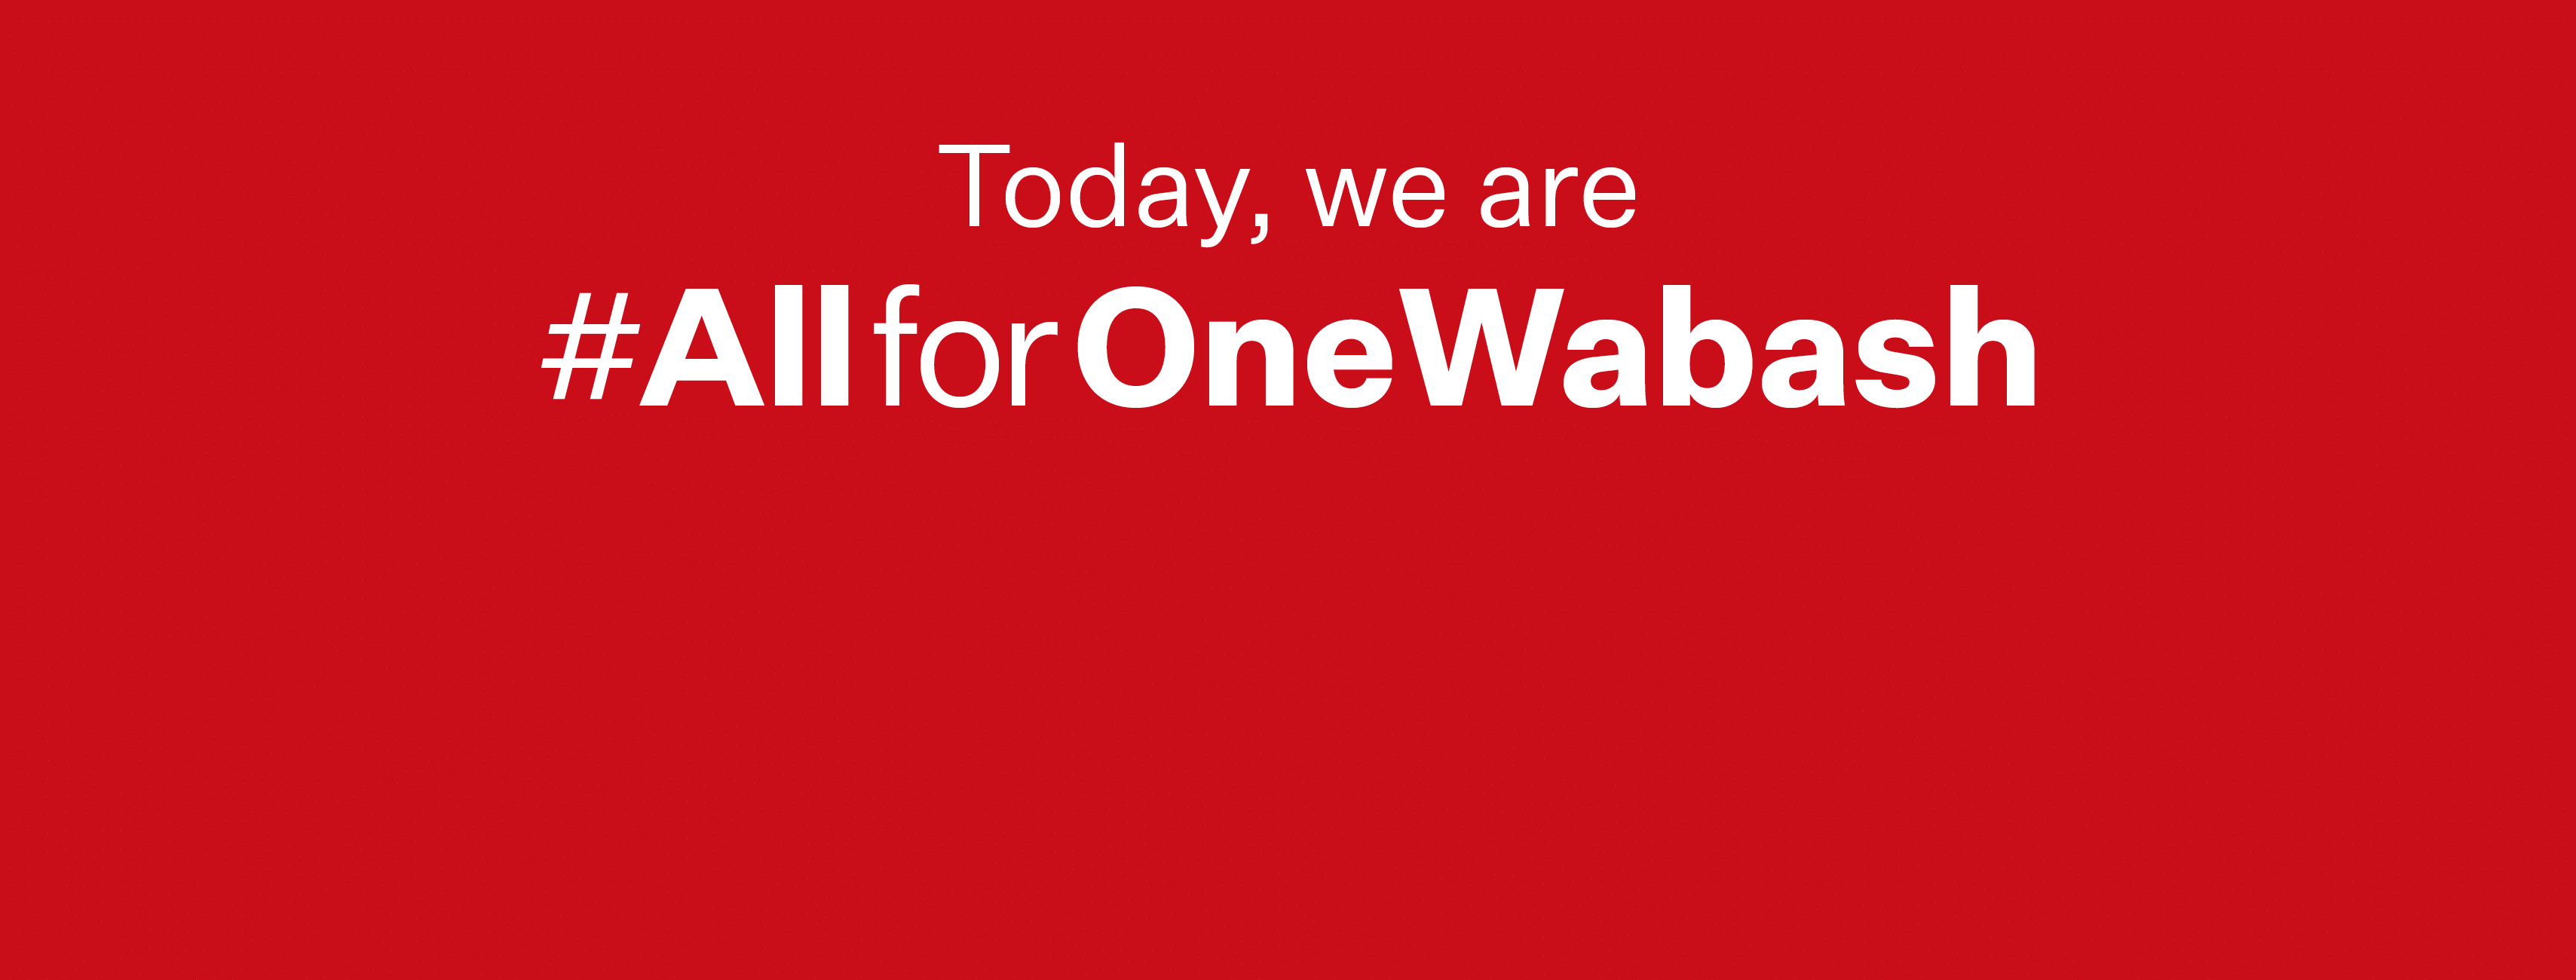 Wabash Day of Giving - Facebook Cover Photo